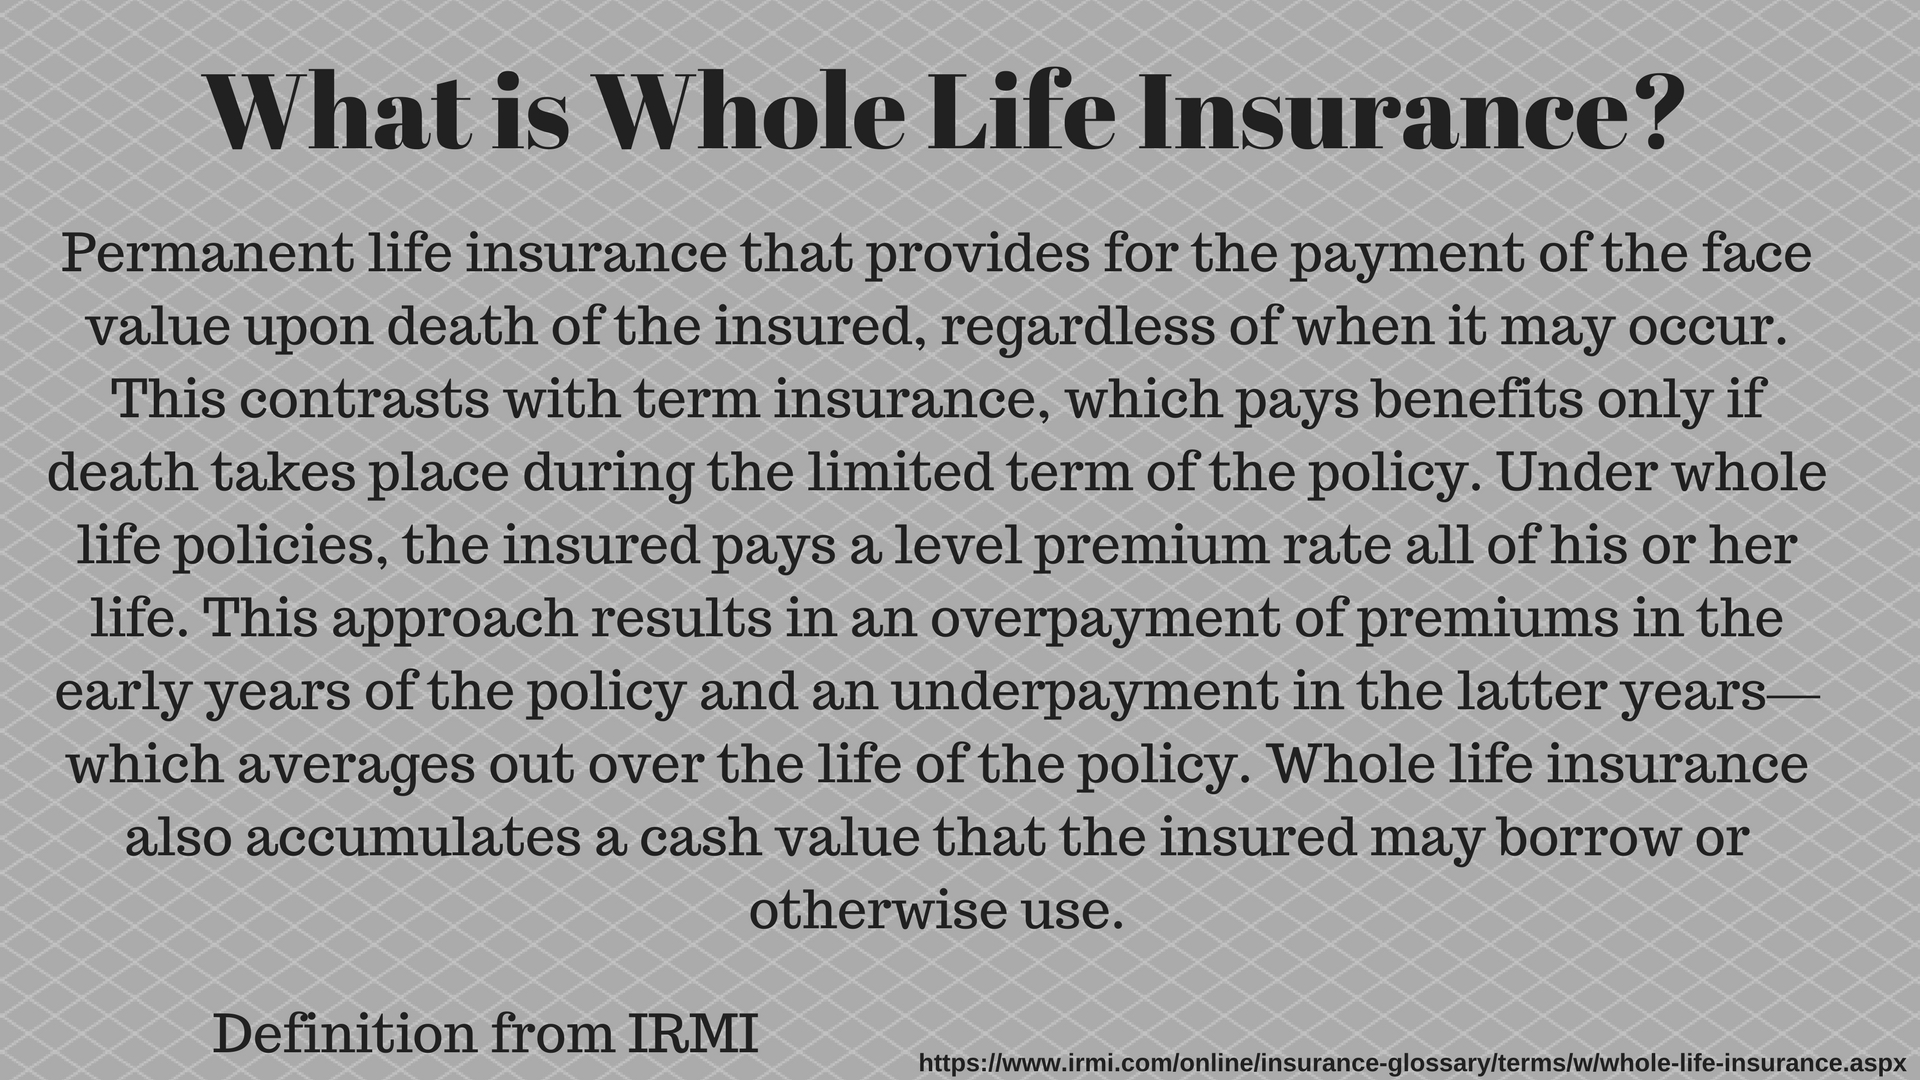 What is Whole Life Insurance